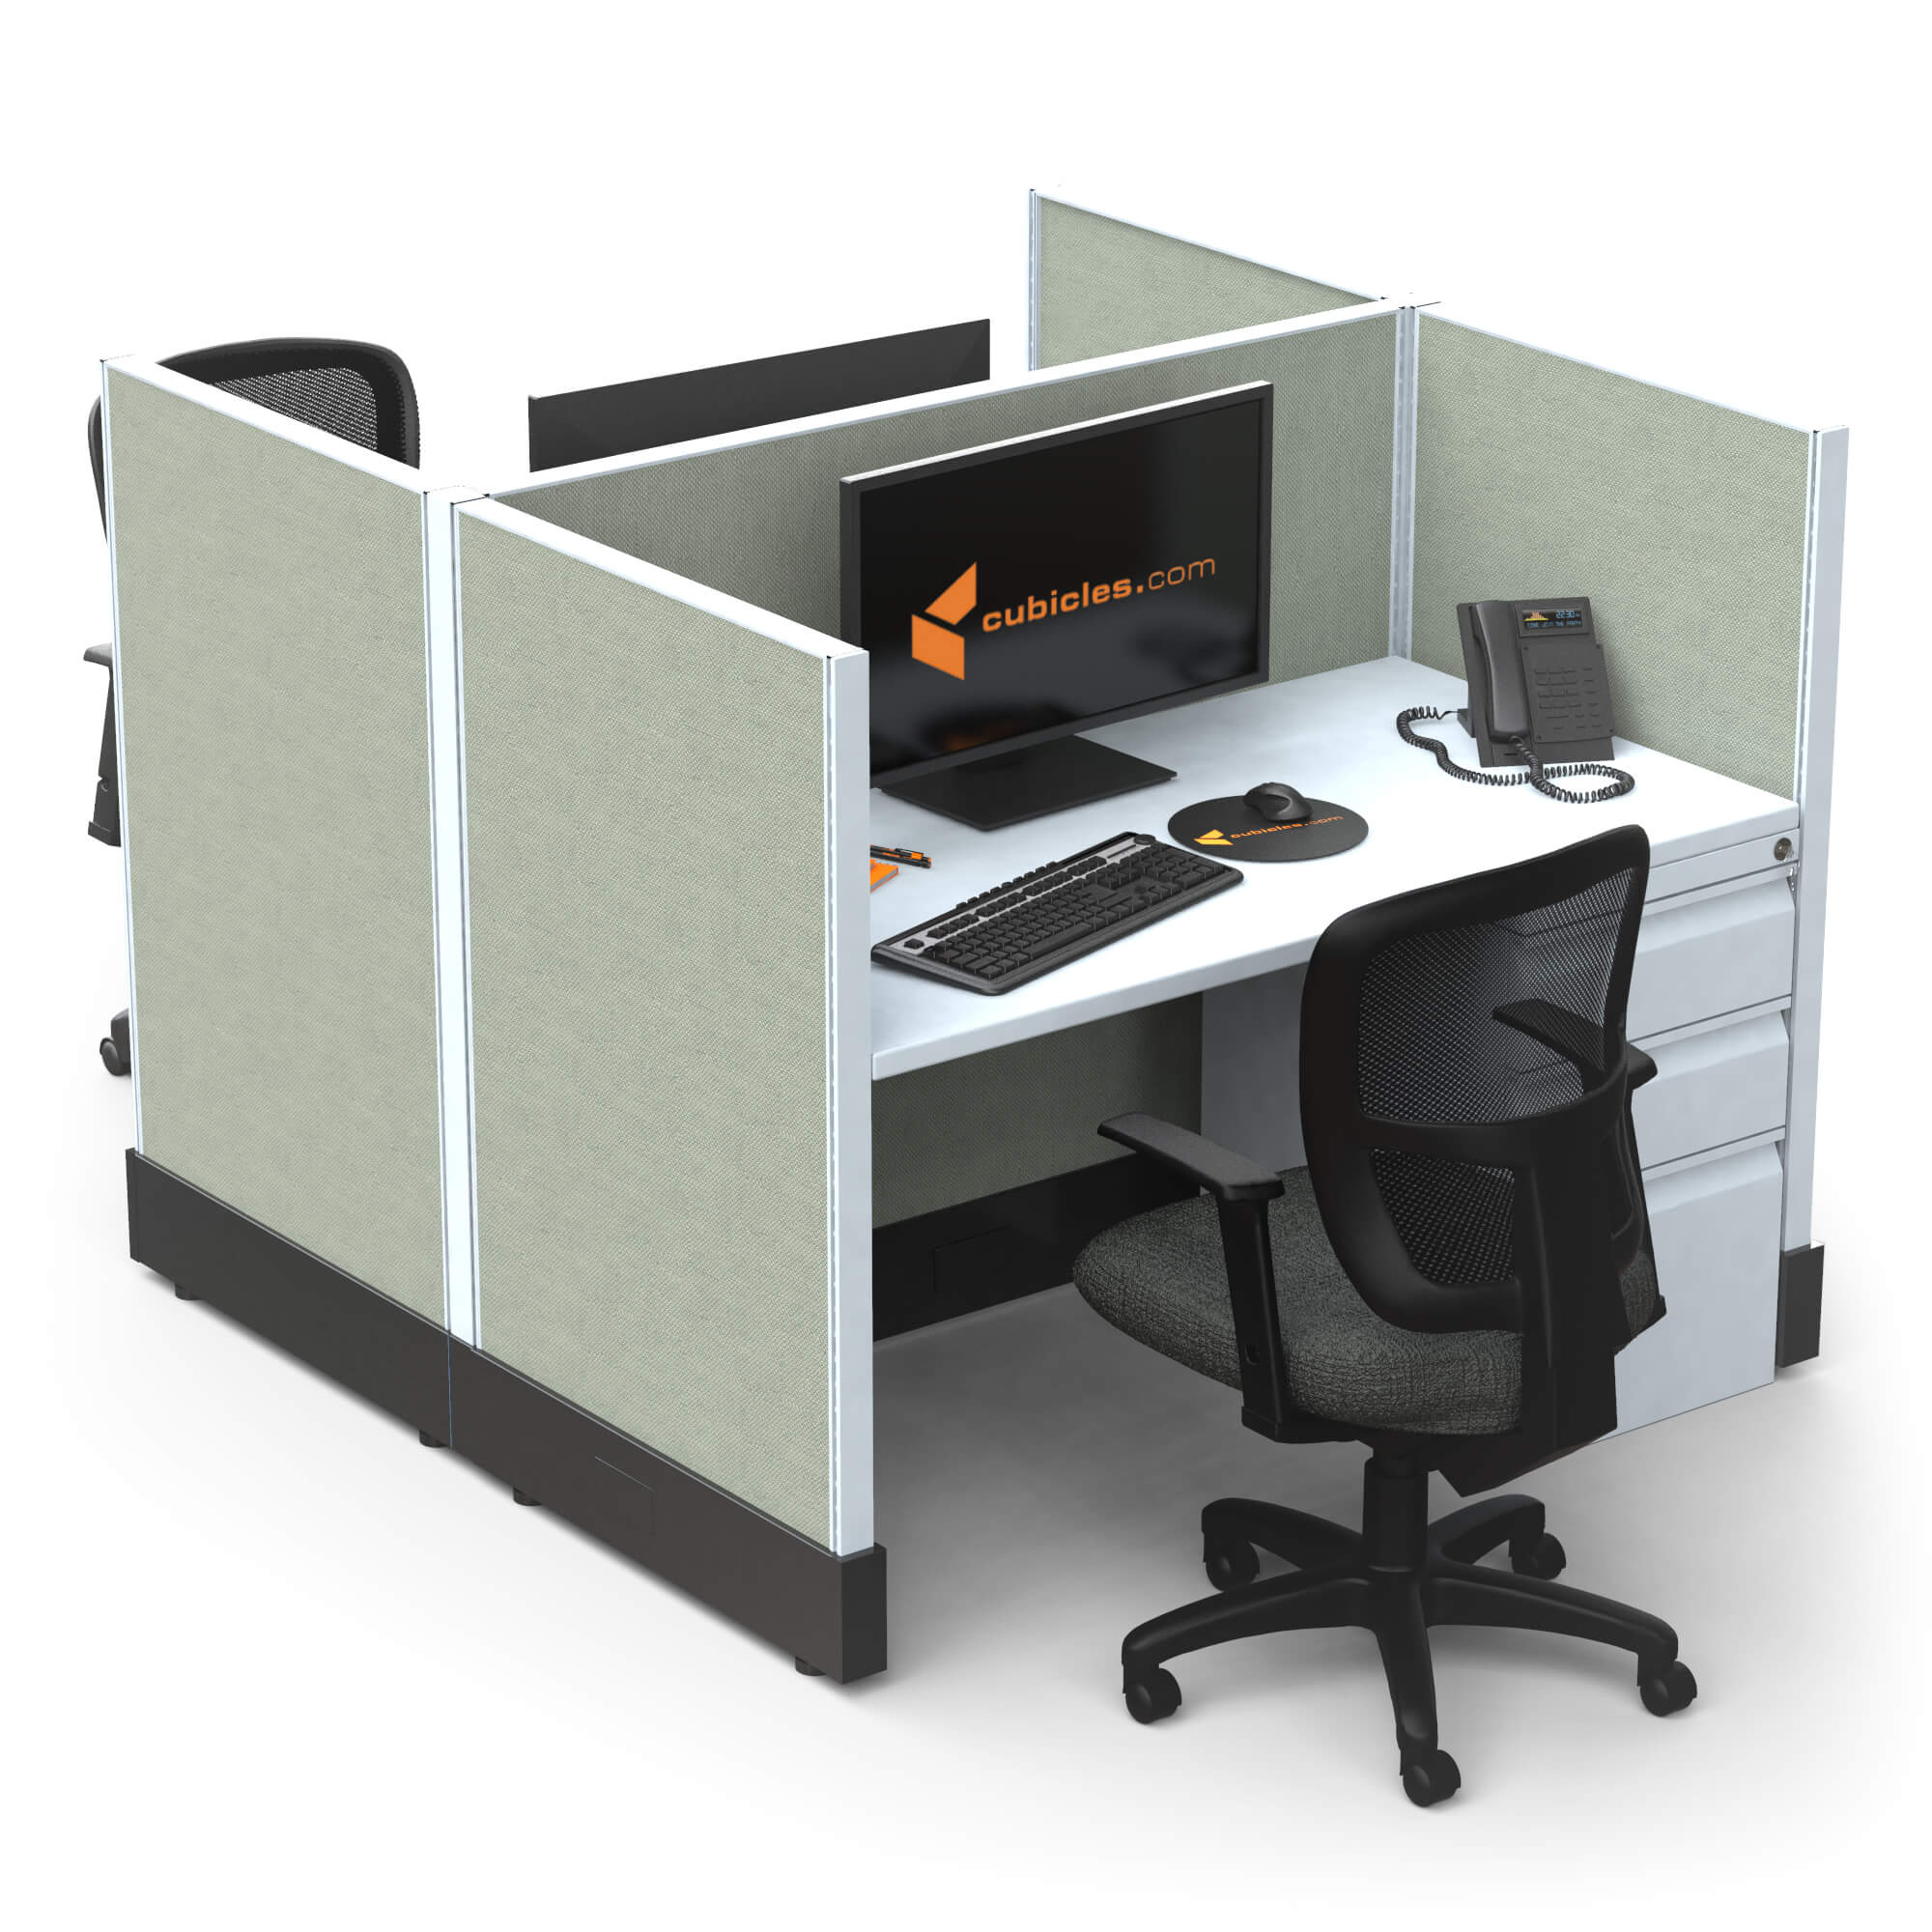 hot-desking-small-office-cubicles-2c-pack.jpg